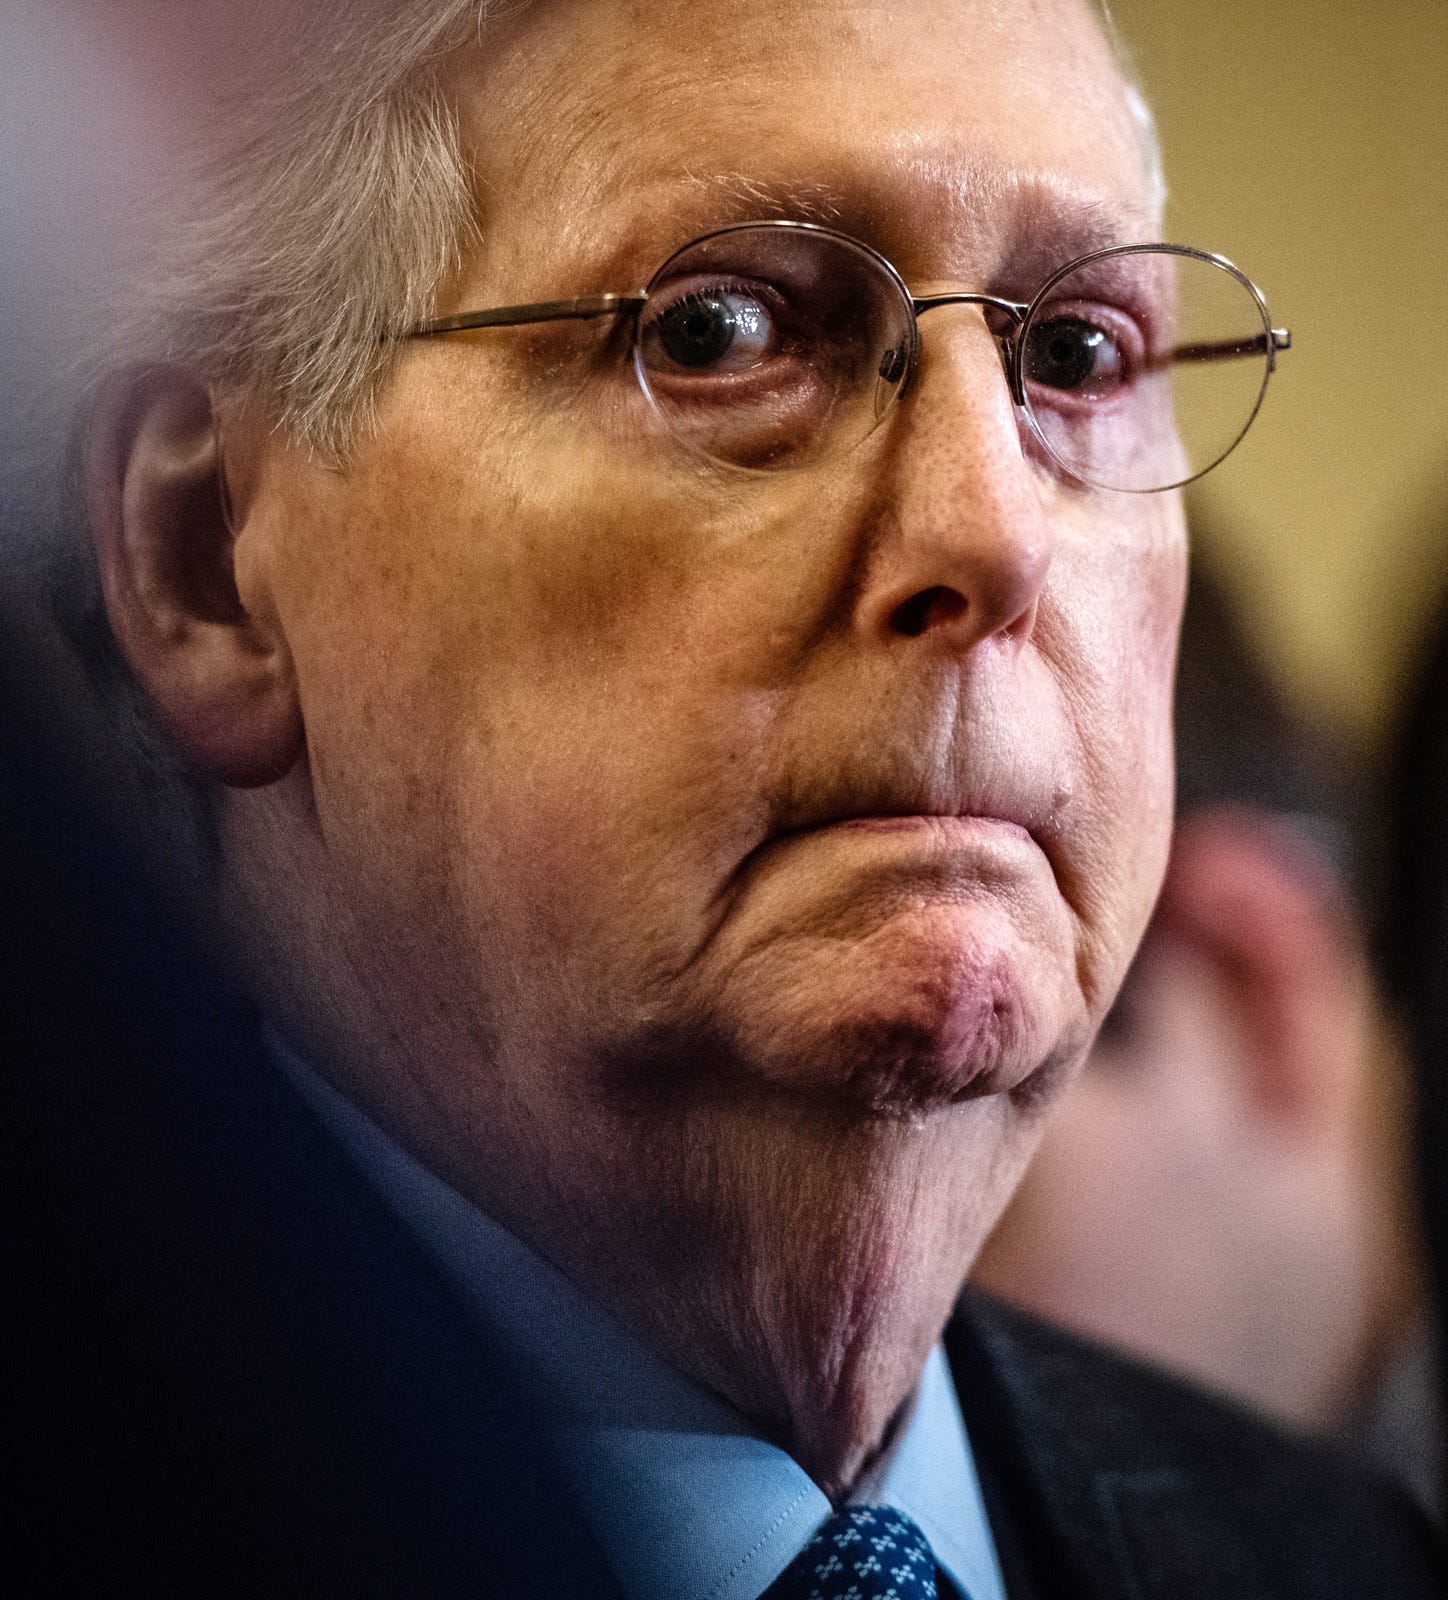 "mitch mcconnell" Meme Templates - Imgflip